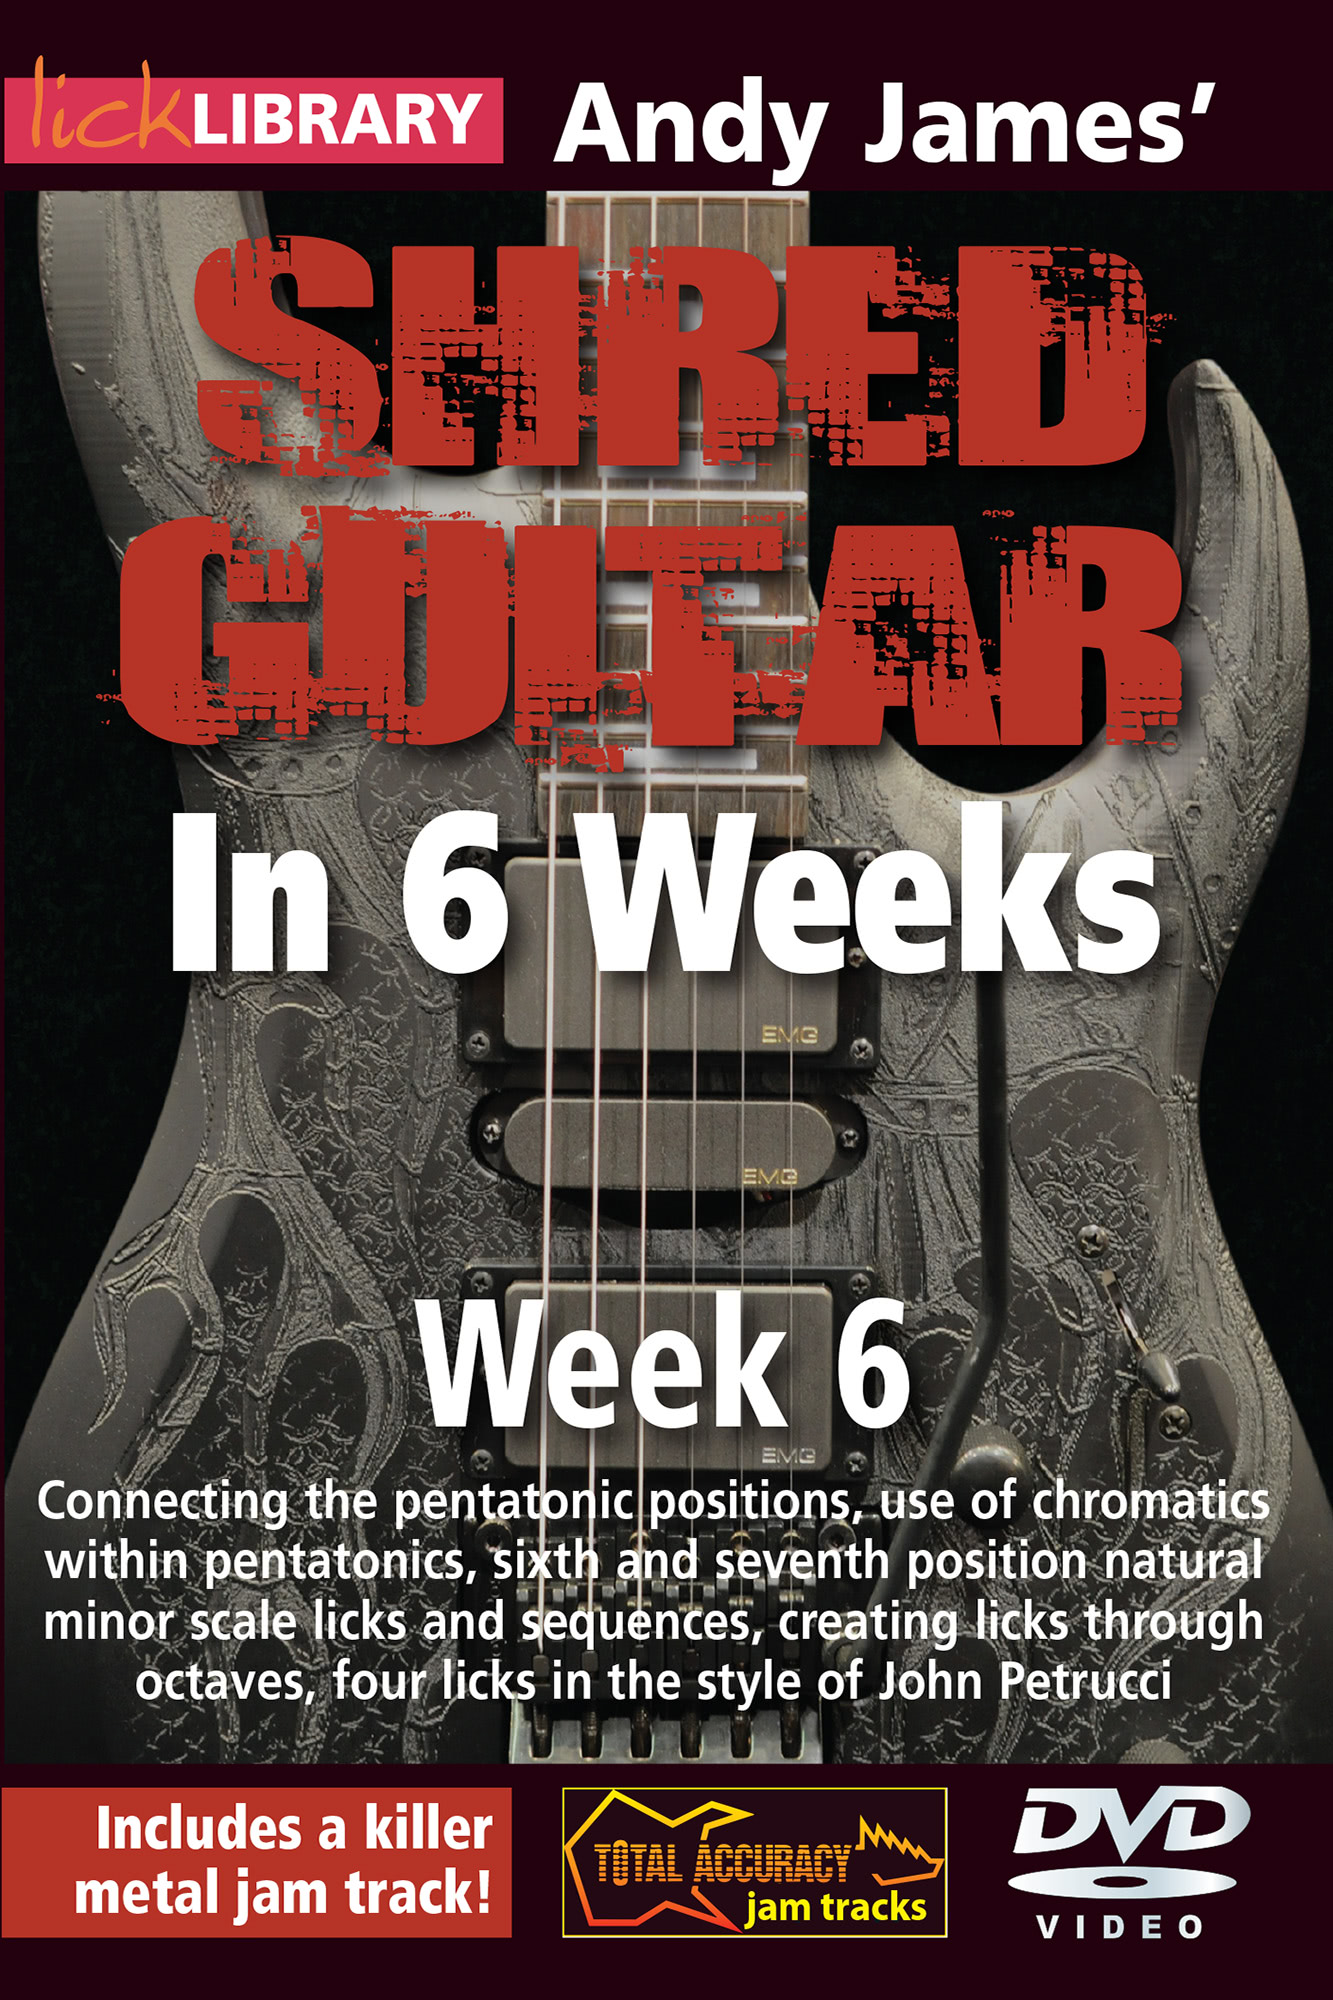 50 Shred Guitar Licks You MUST Know